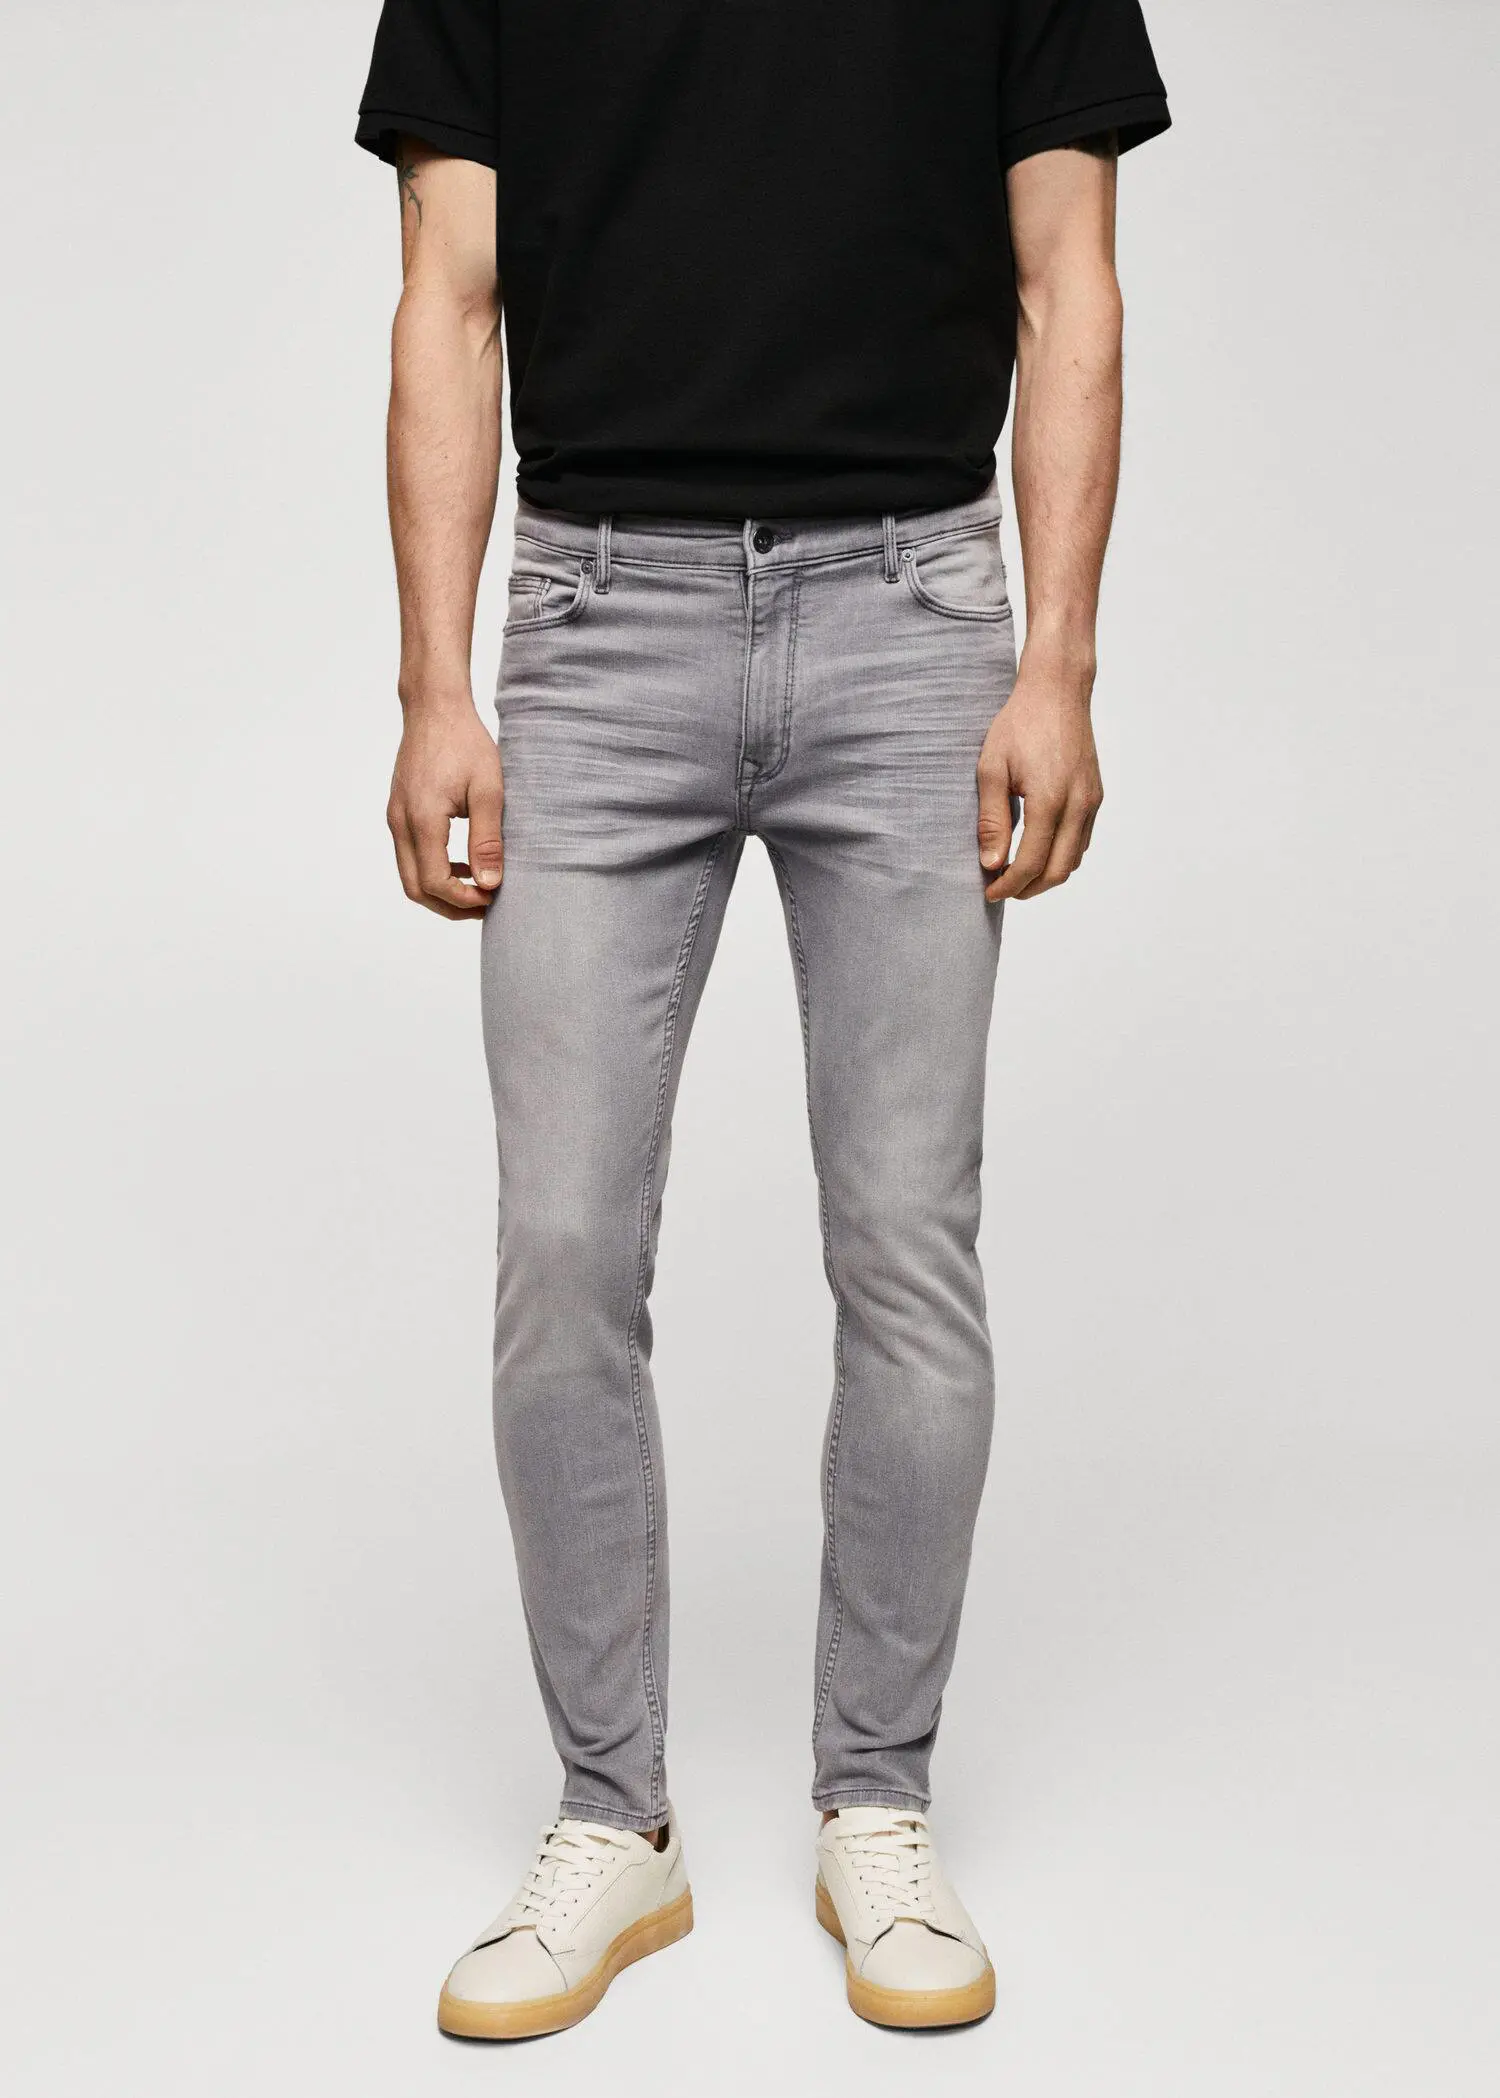 Mango Jude skinny-fit jeans. a man wearing a black t-shirt and gray jeans. 